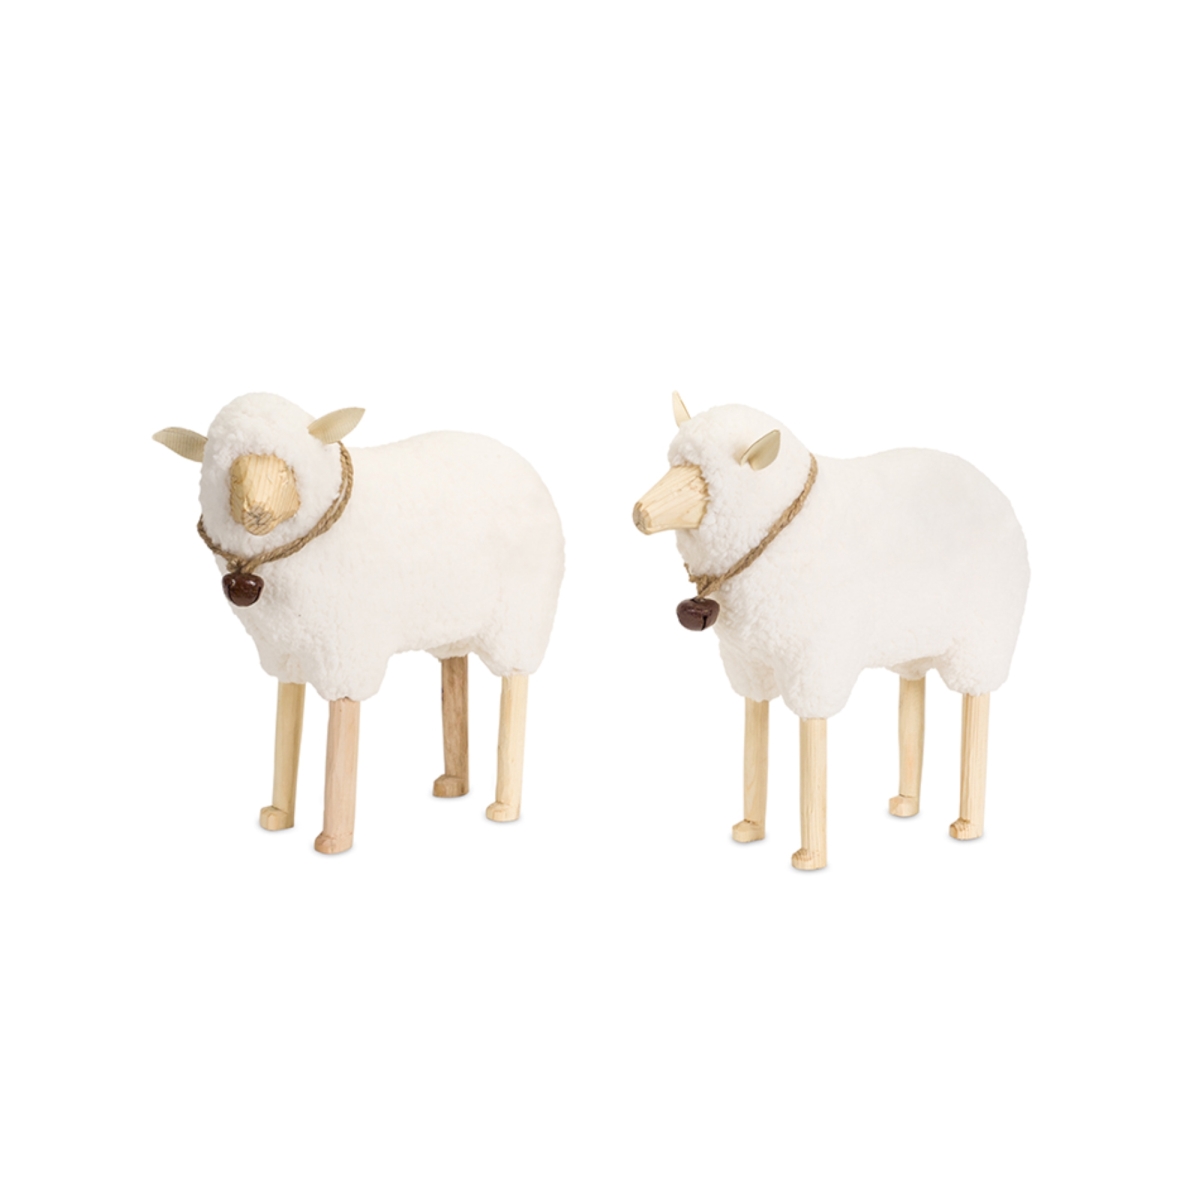 72445ds 11.5 X 3.5 In. Wood Sheep Novelty, White & Brown - Set Of 2